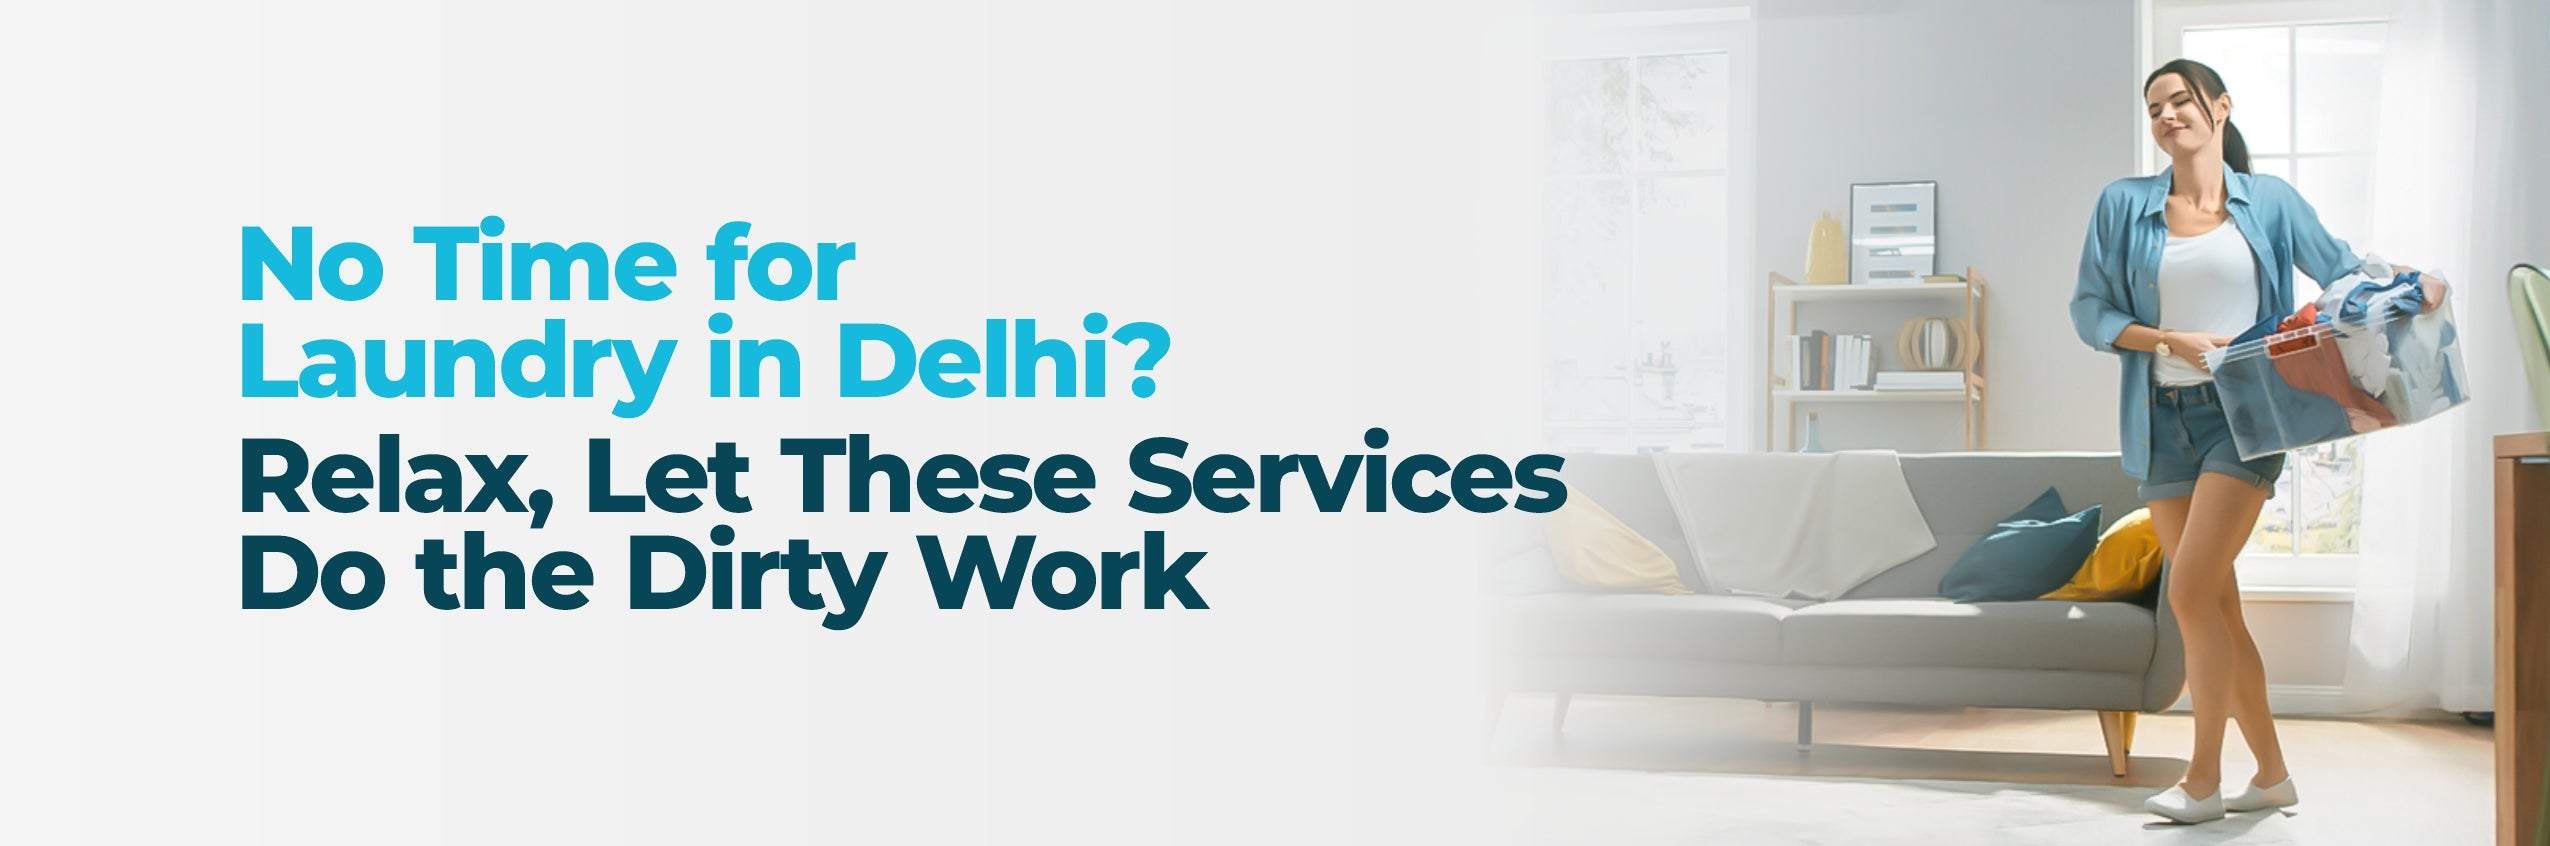 No Time for Laundry in Delhi Relax, Let These Services Do the Dirty Work